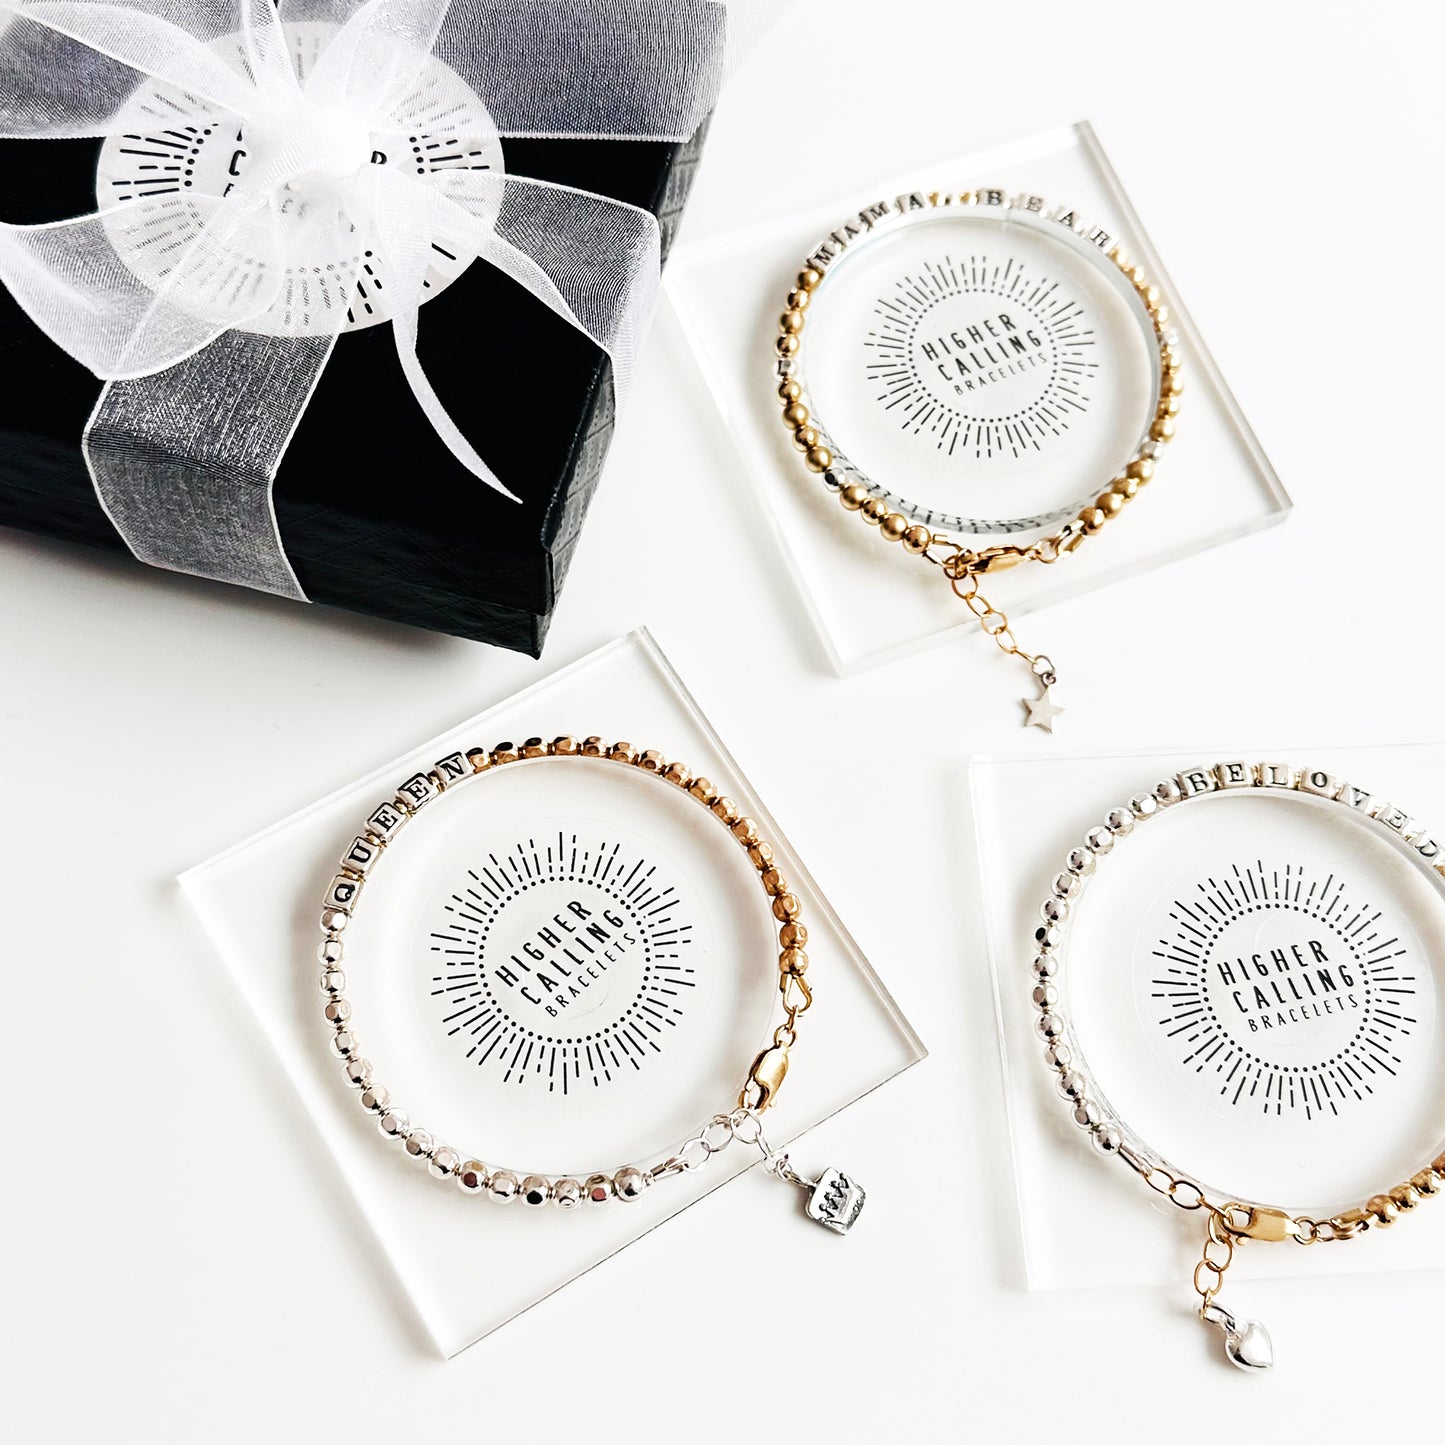 Special Mother's Day Jewelry in beautiful packaging by Higher Calling Bracelets